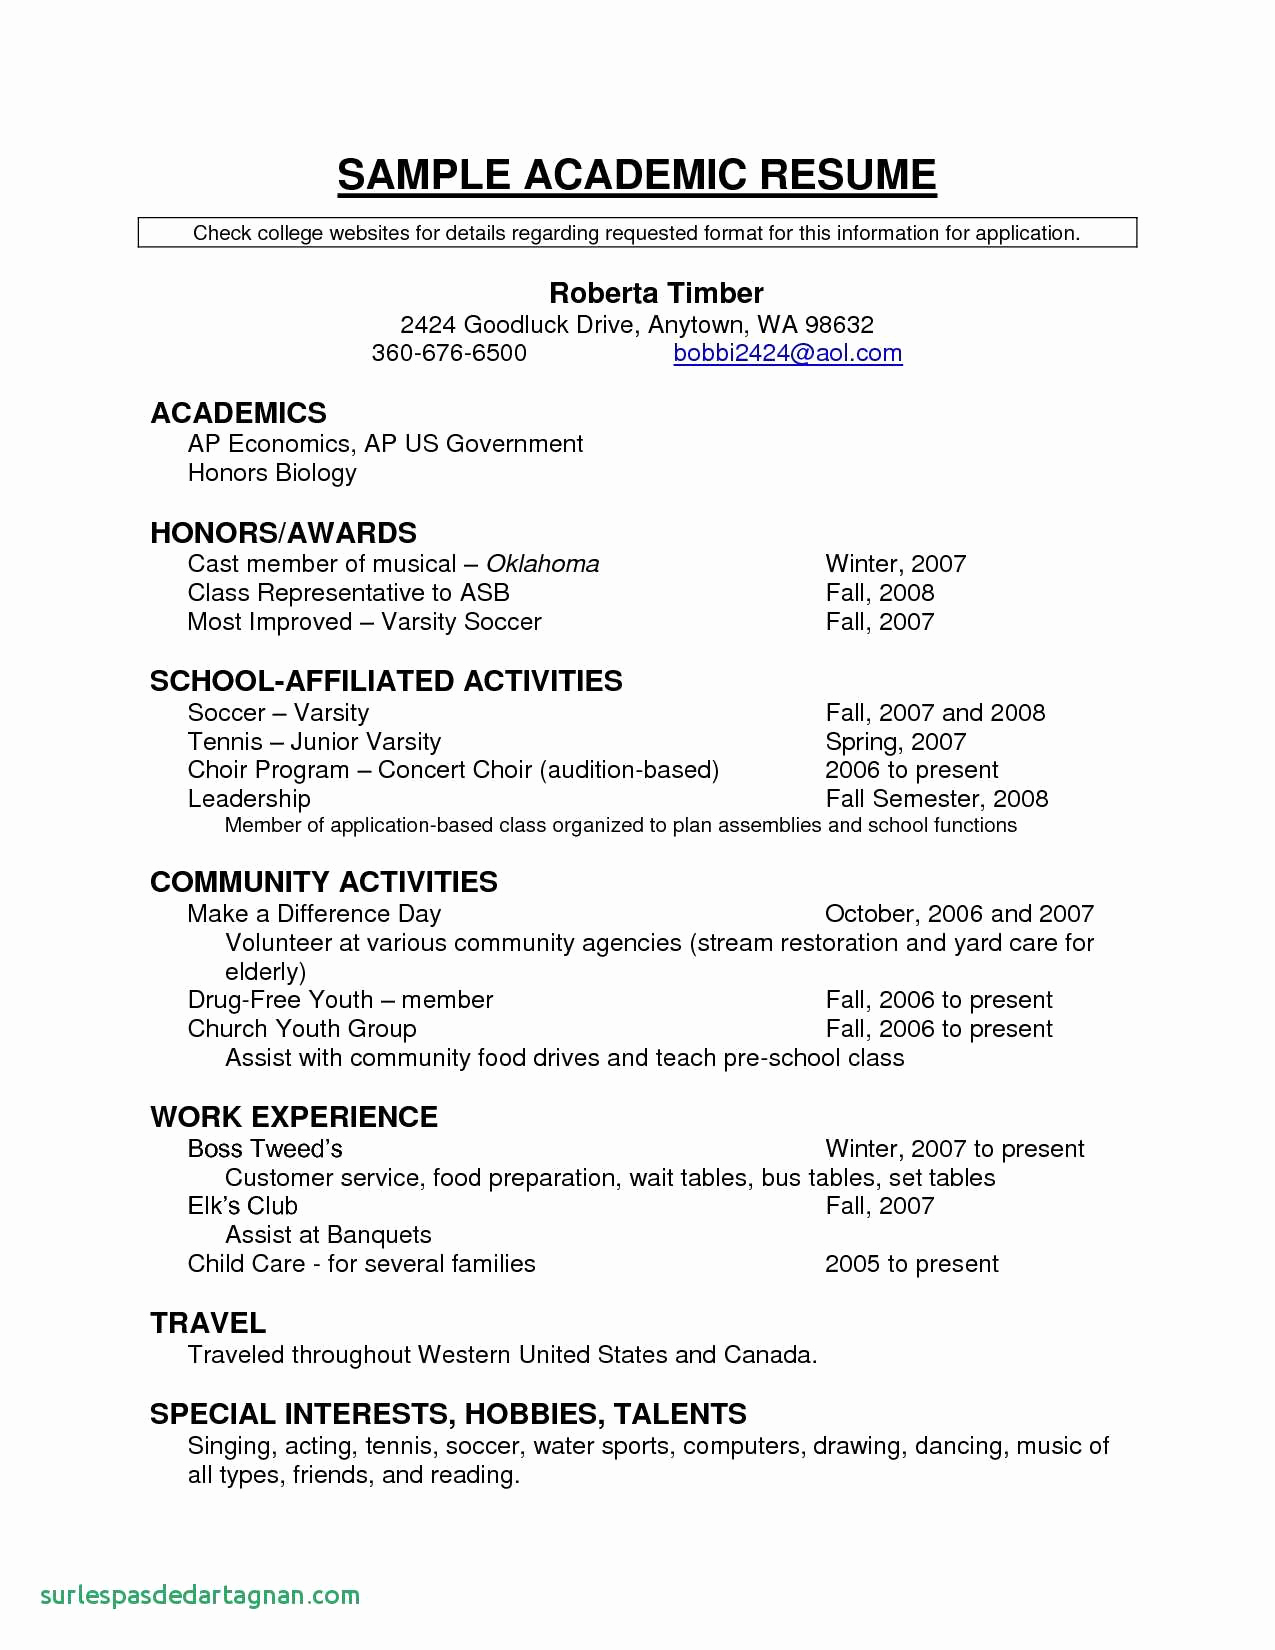 basic resume template example of resume basic template with three